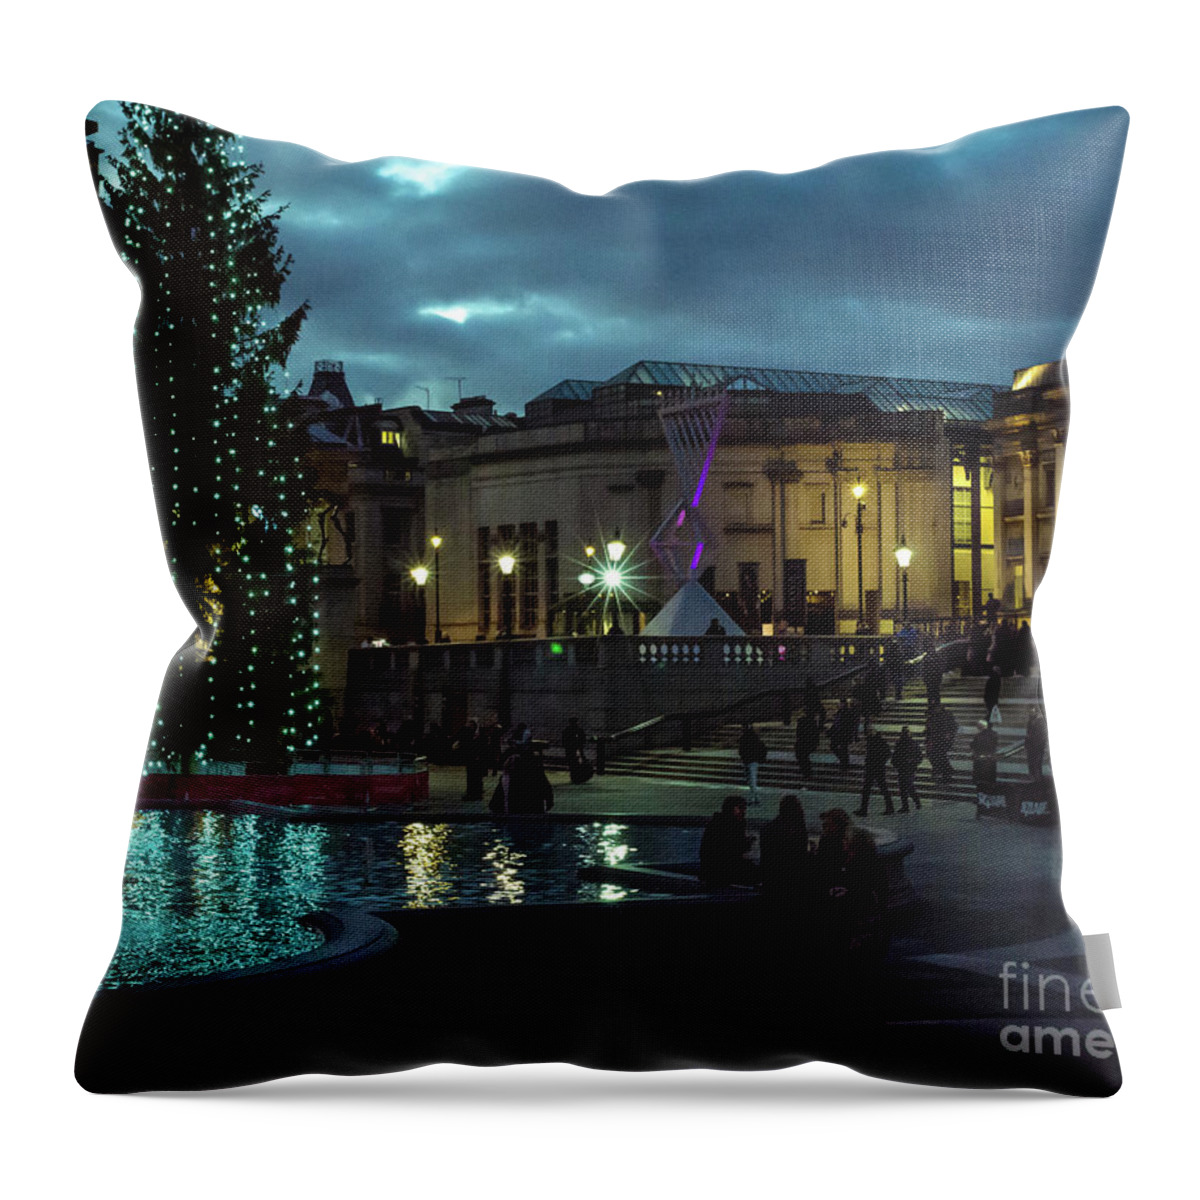 Merry Christmas Throw Pillow featuring the photograph Christmas In Trafalgar Square, London 2 by Perry Rodriguez